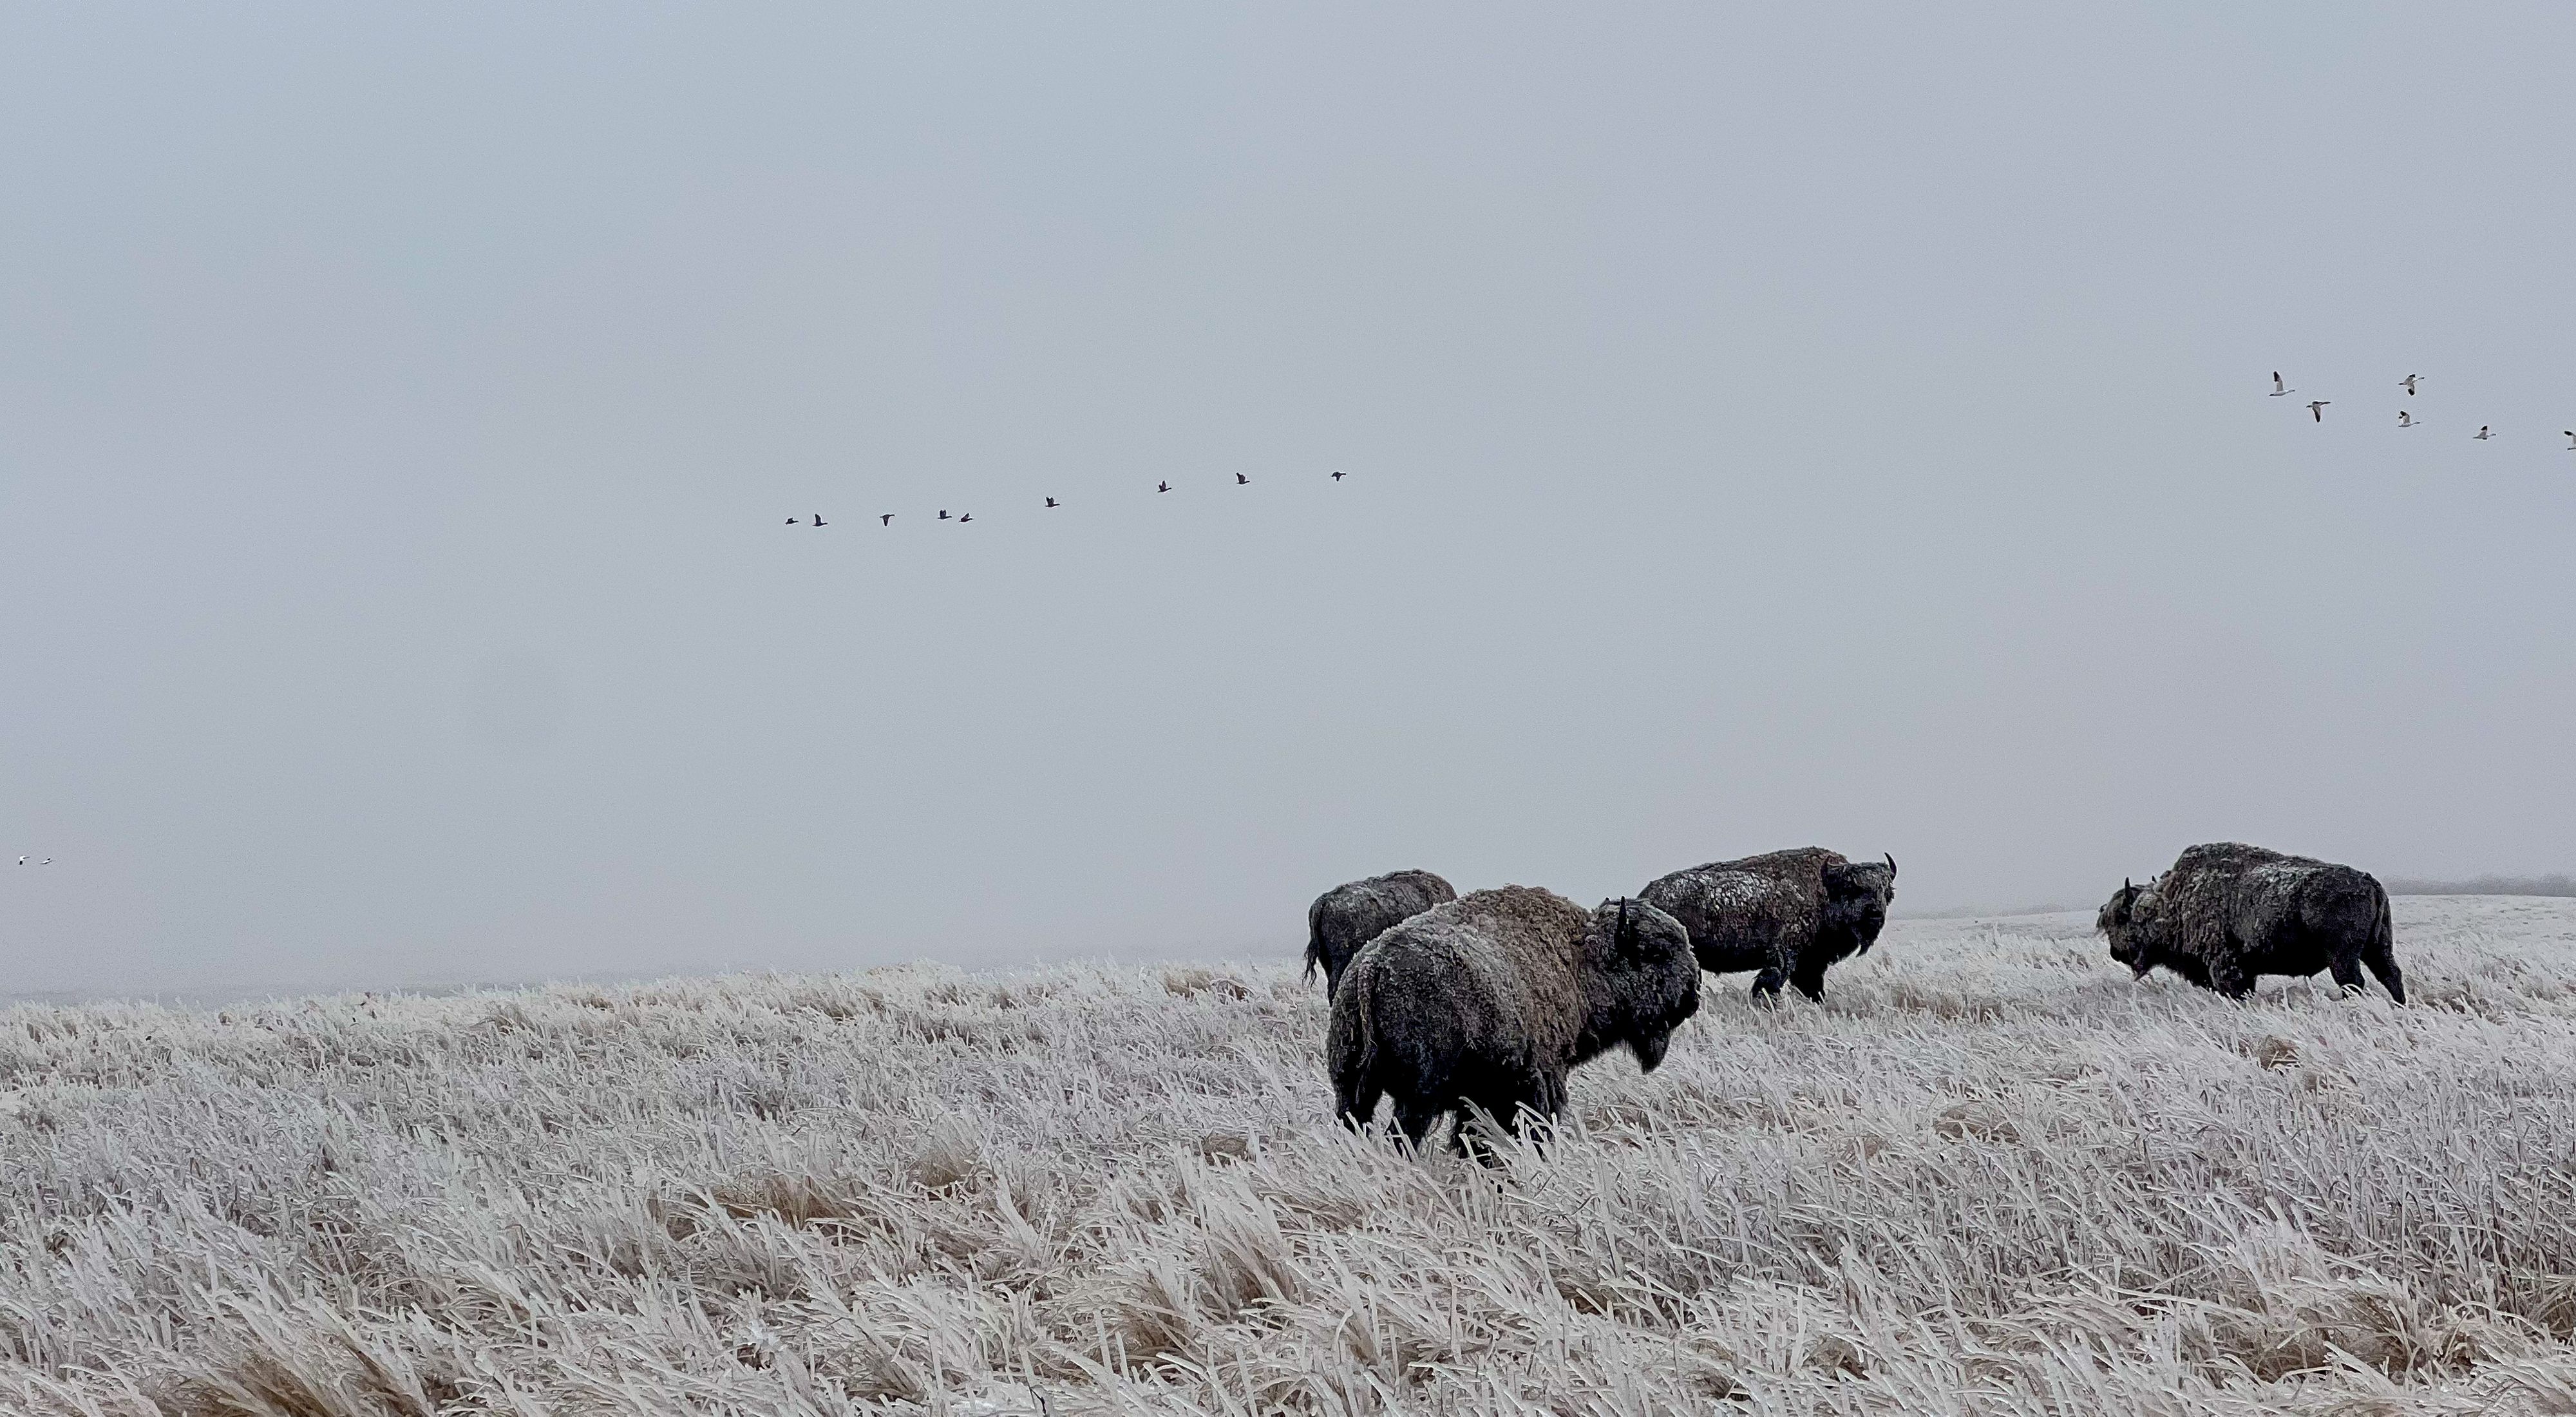 Bison in an ice storm on the prairie.